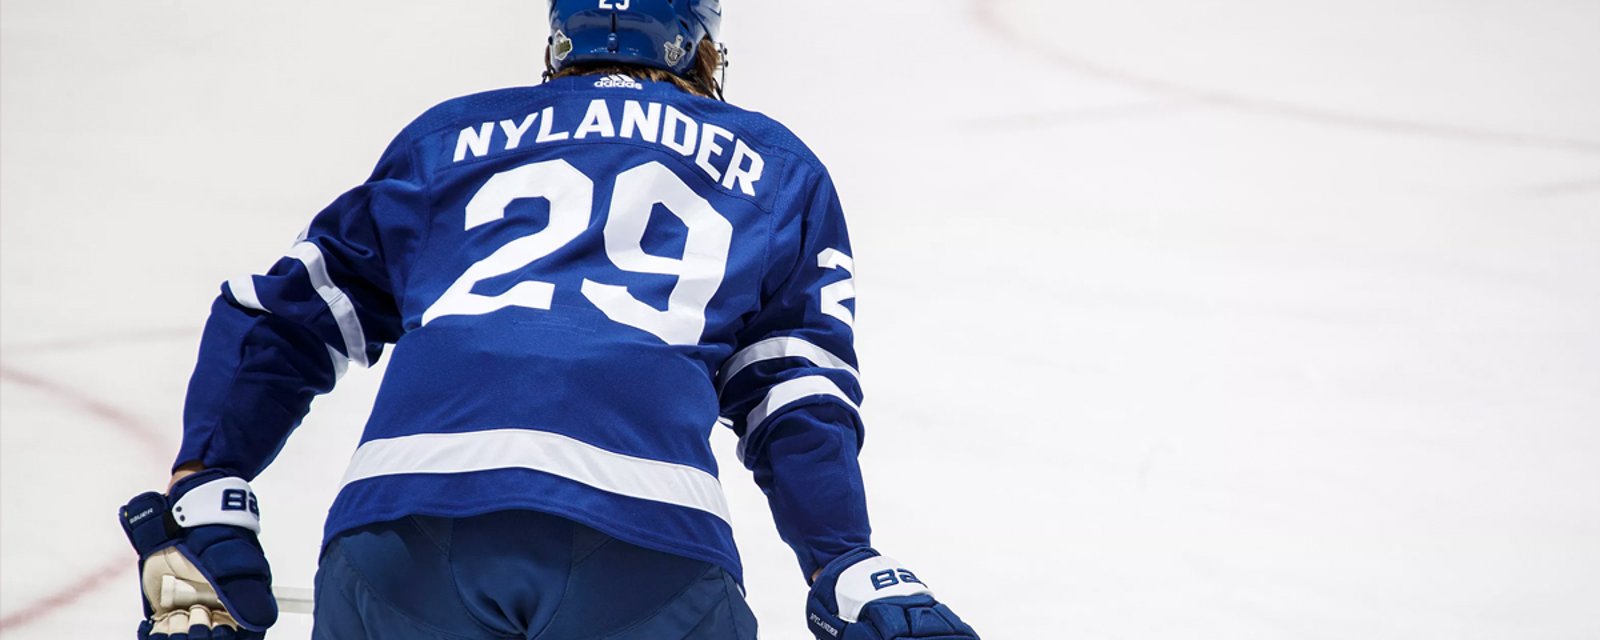 Concerning news for Leafs following meeting between Nylander and Dubas